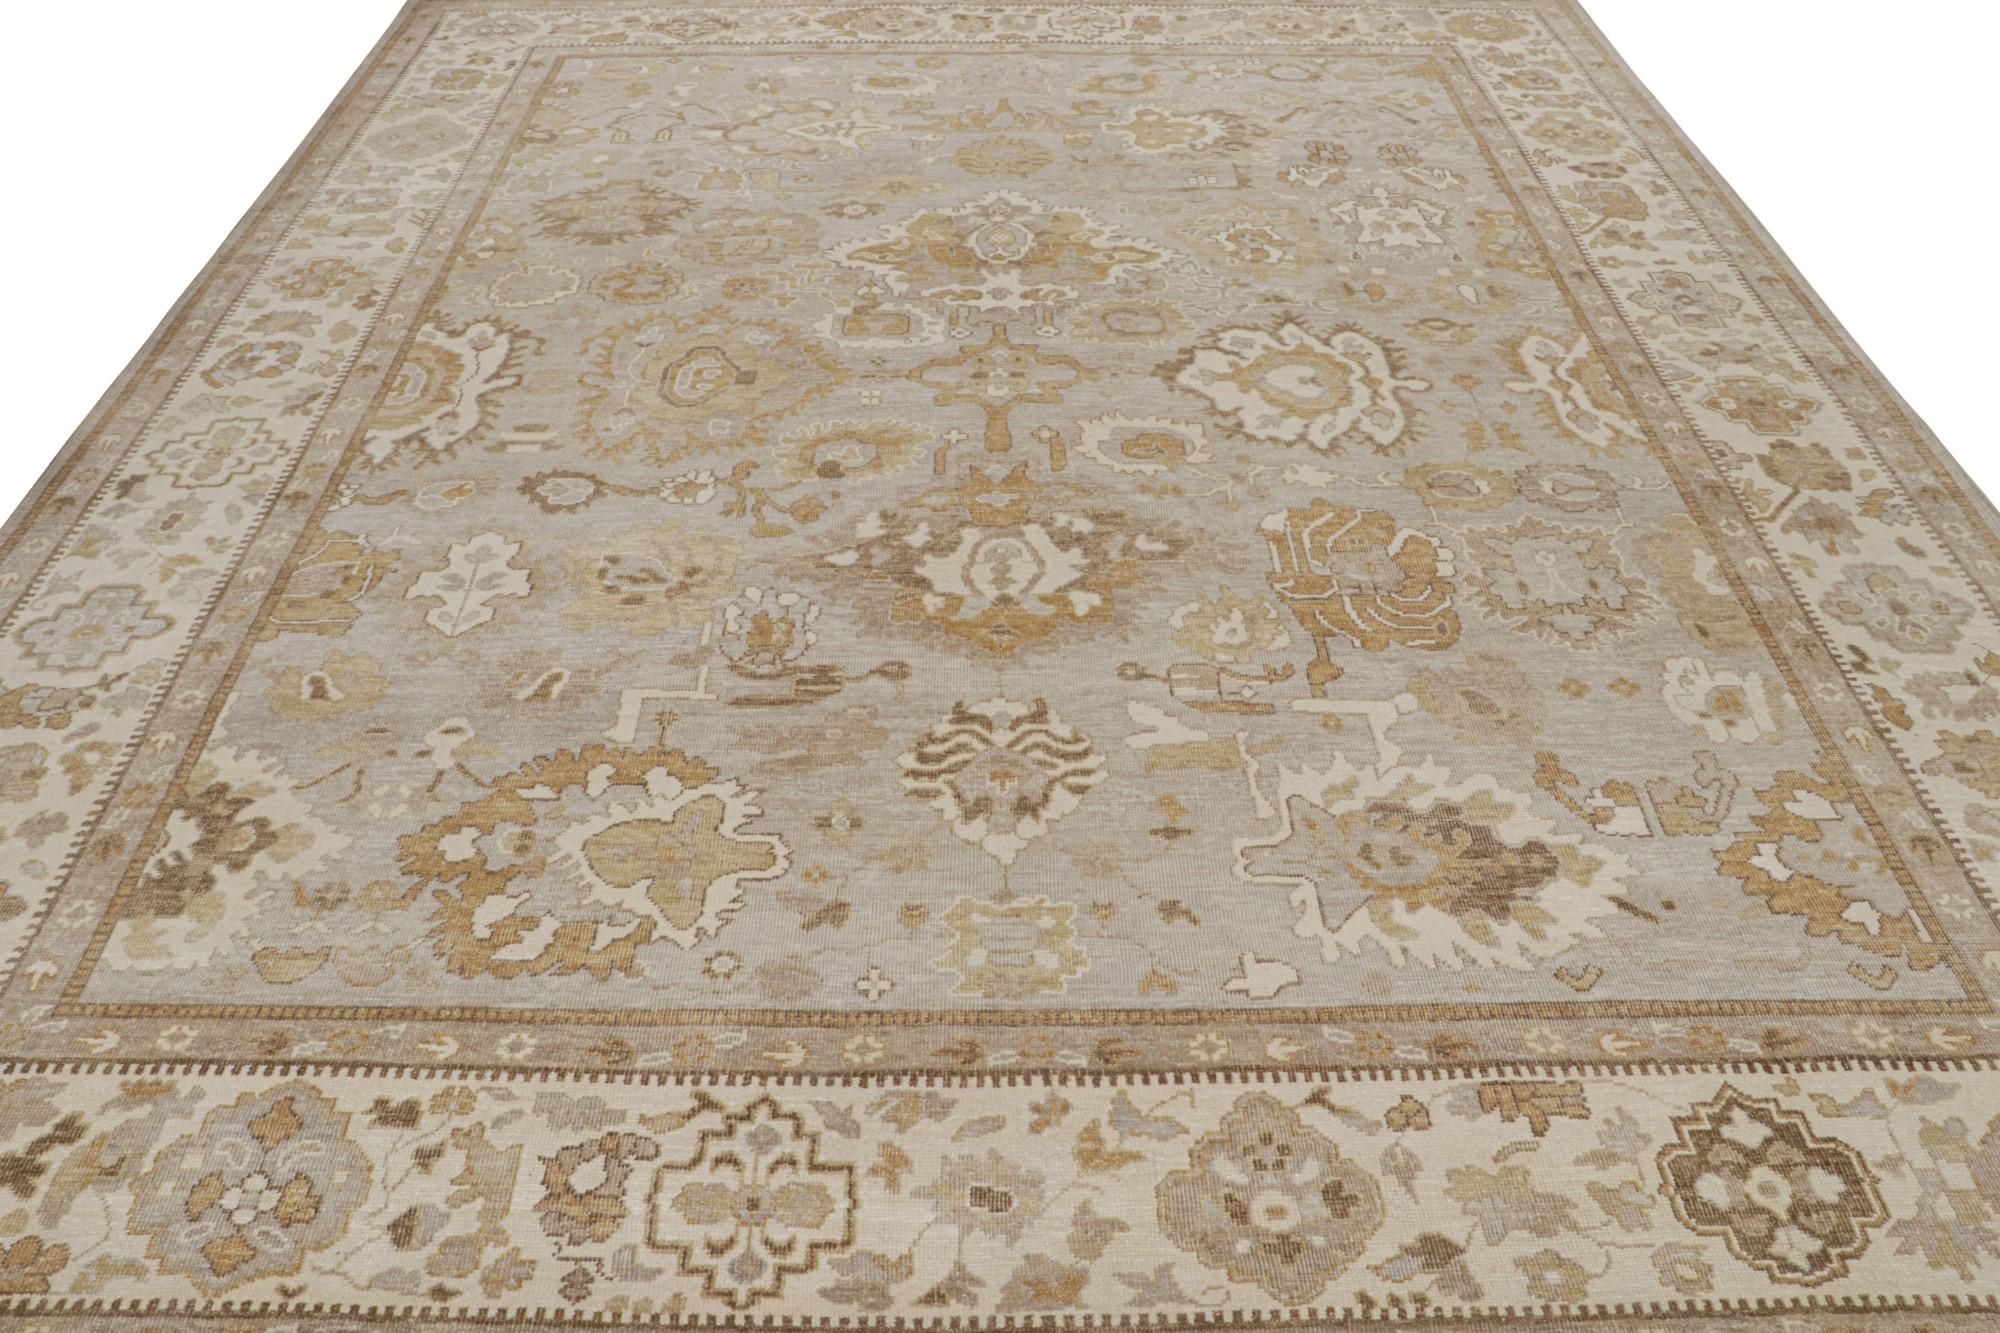 Indian Rug & Kilim’s Oushak Style Rug in Beige-Brown & Gold Floral Pattern For Sale